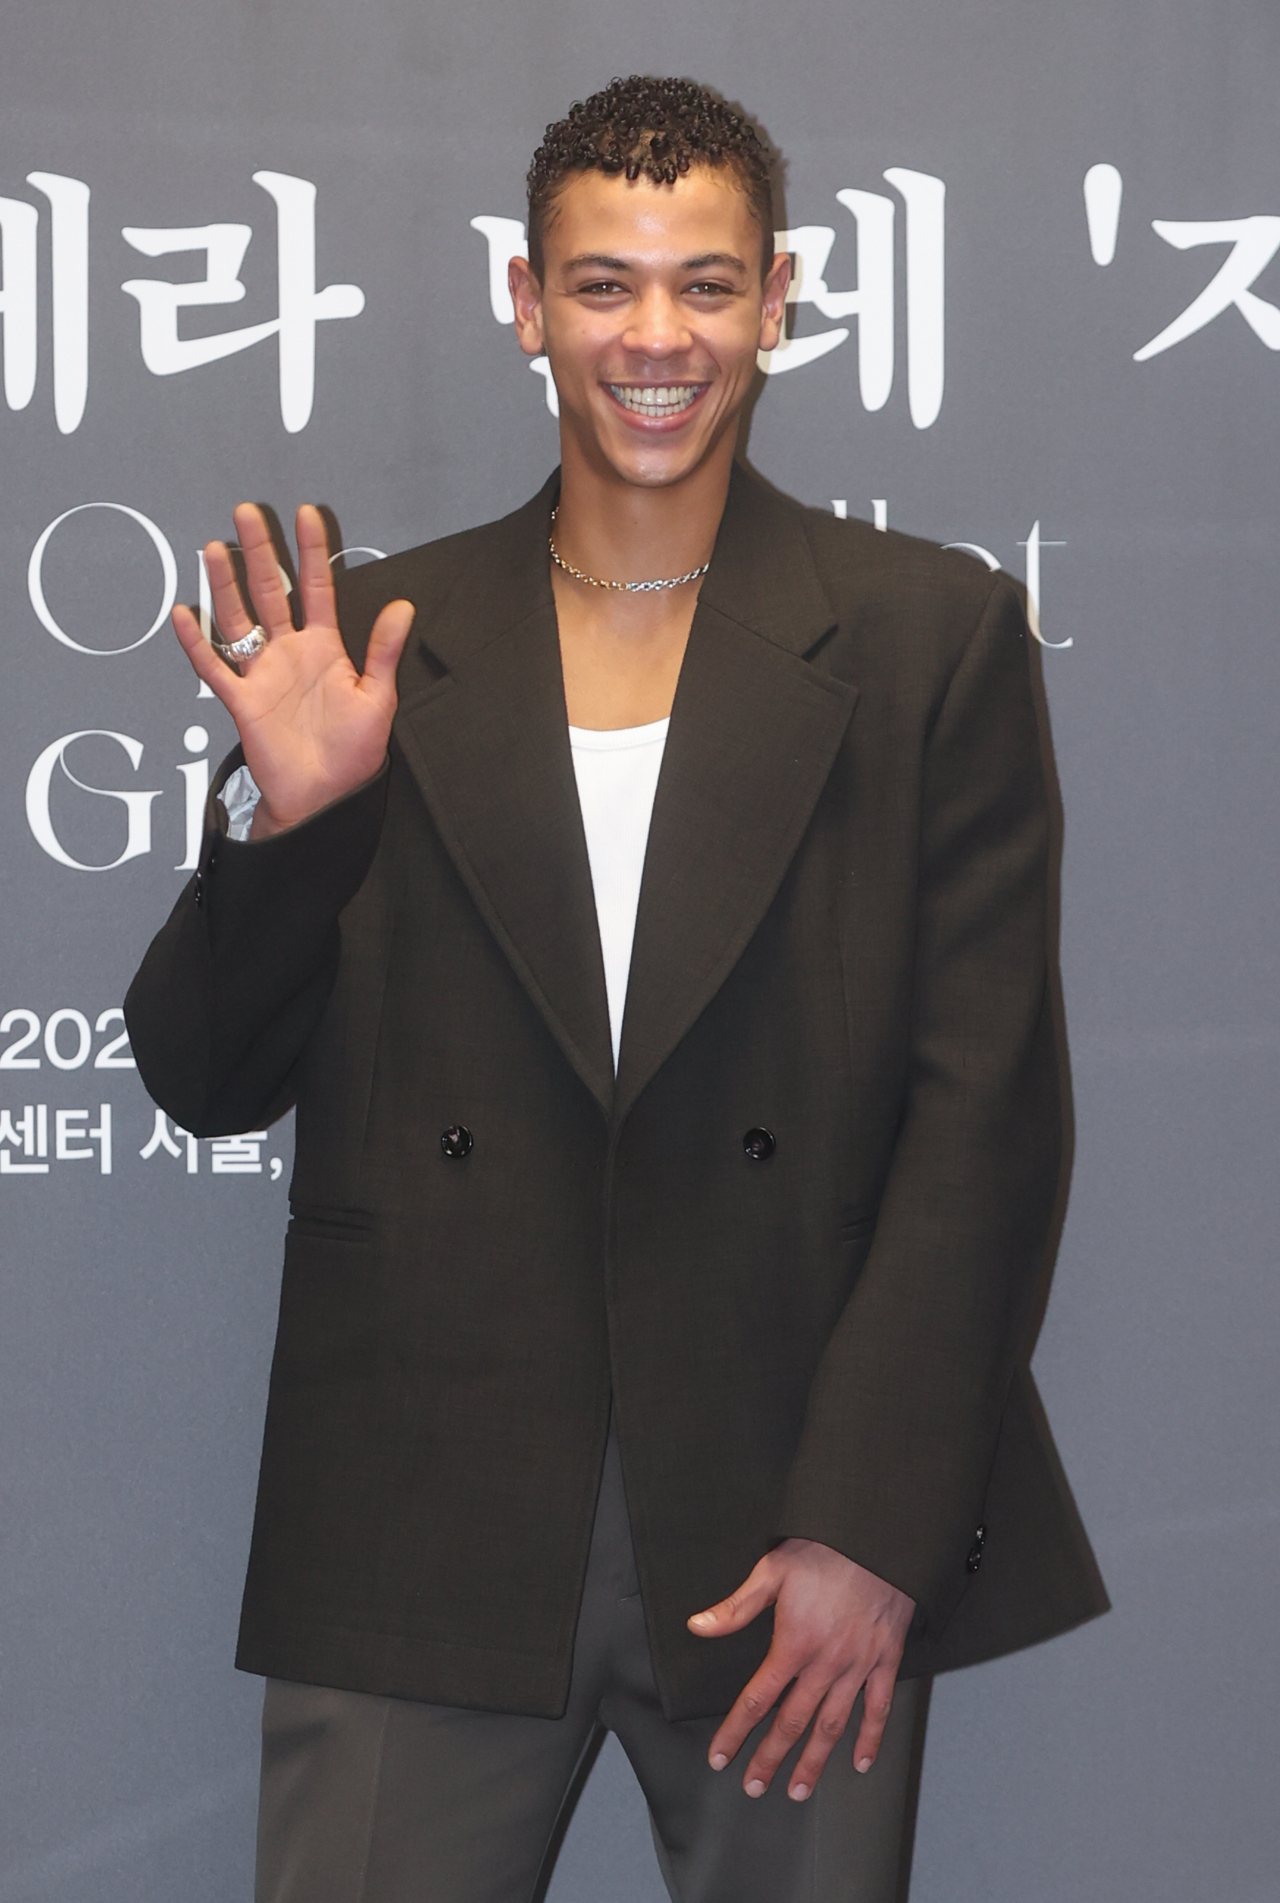 Guillaume Diop attends a press conference held at the LG Arts Center in Seoul, March 7. (Yonhap)